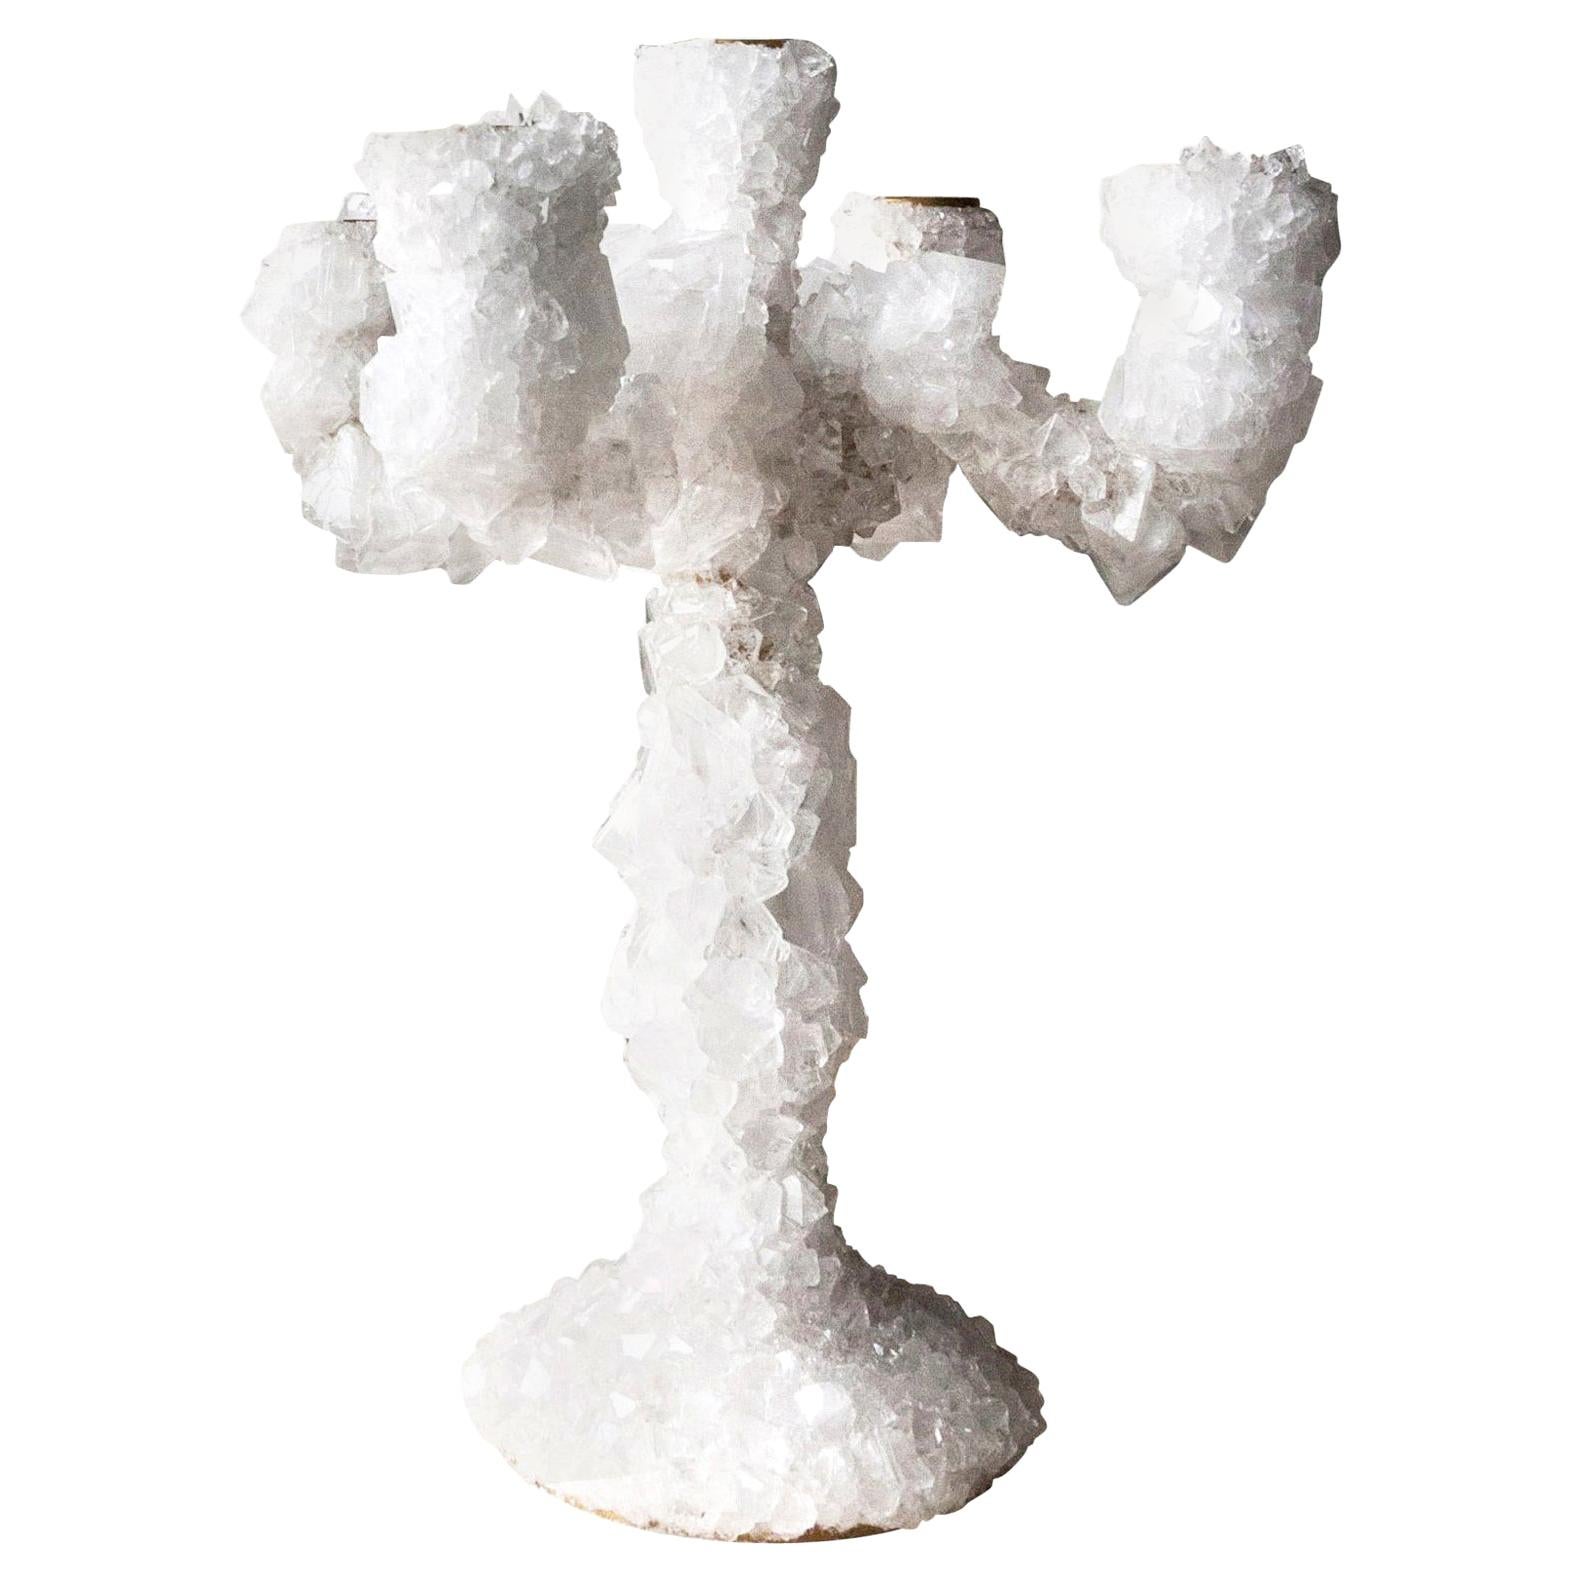 Small crystals overgrown candelabra, Mark Sturkenboom
Hand-sculpted unique design artwork by Mark Sturkenboom
Dimensions: W 24 x D 8 X H 30 cm
Material: Aluminium candleholder, natural grown crystal
Each crystal candelabra is unique and